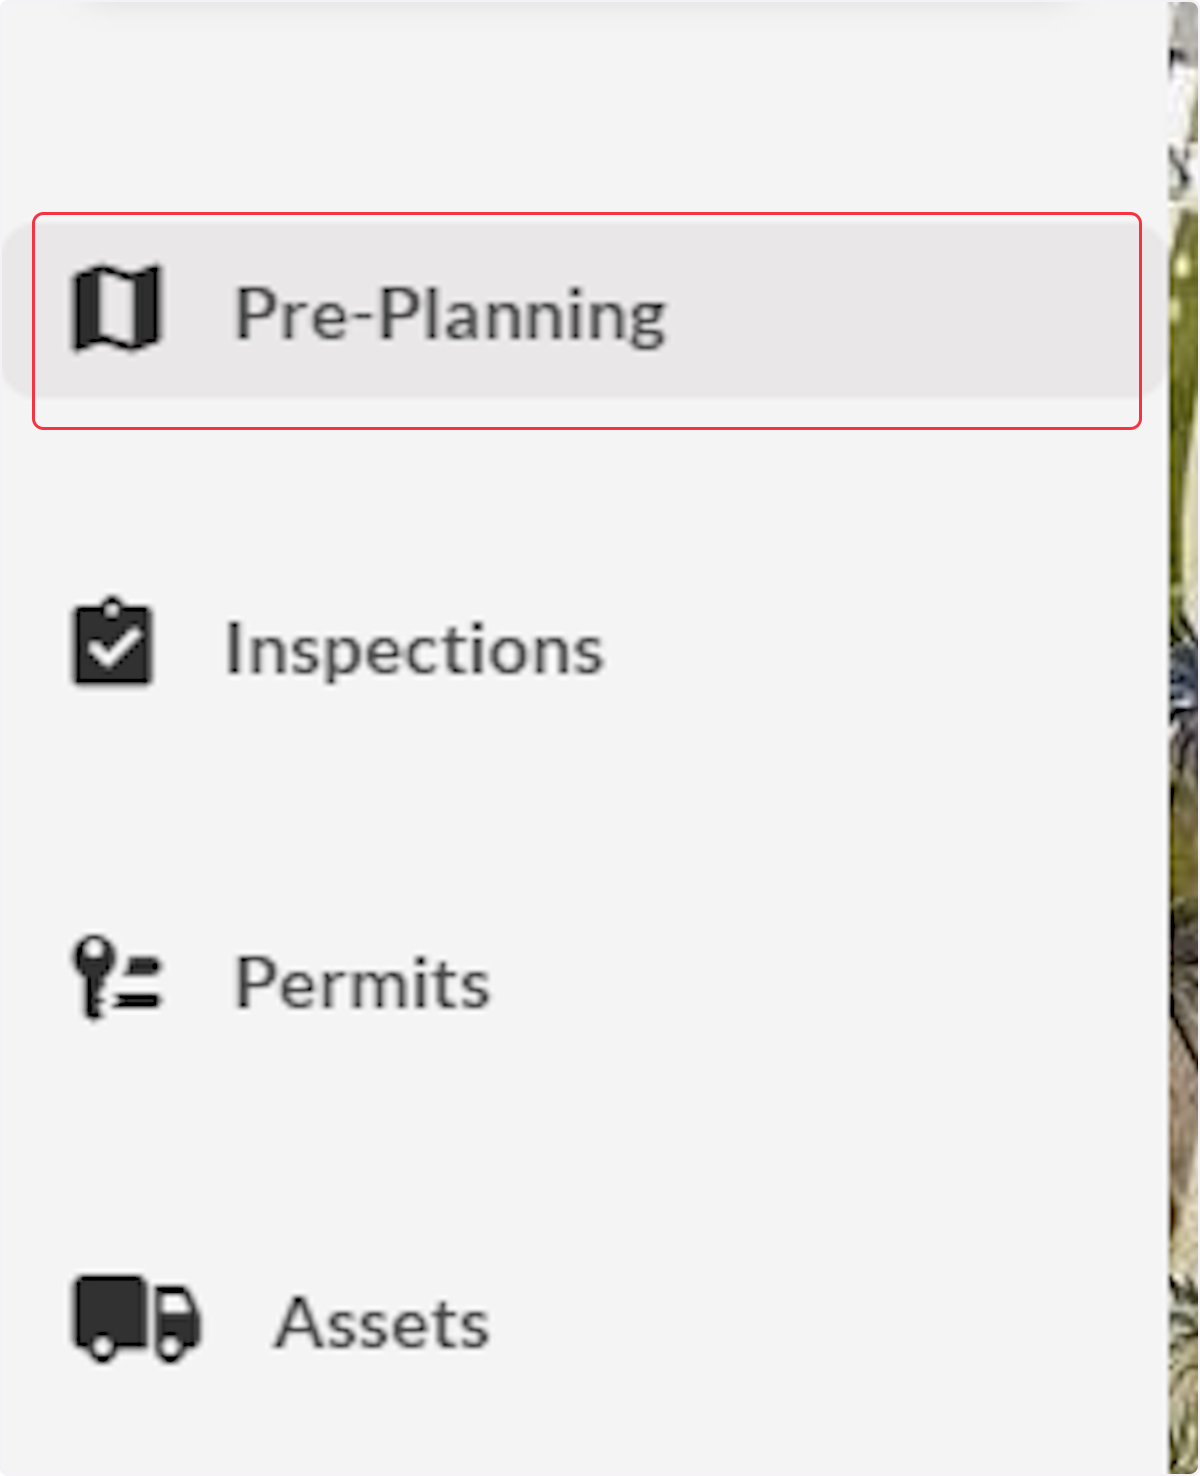 Click on Pre-Planning